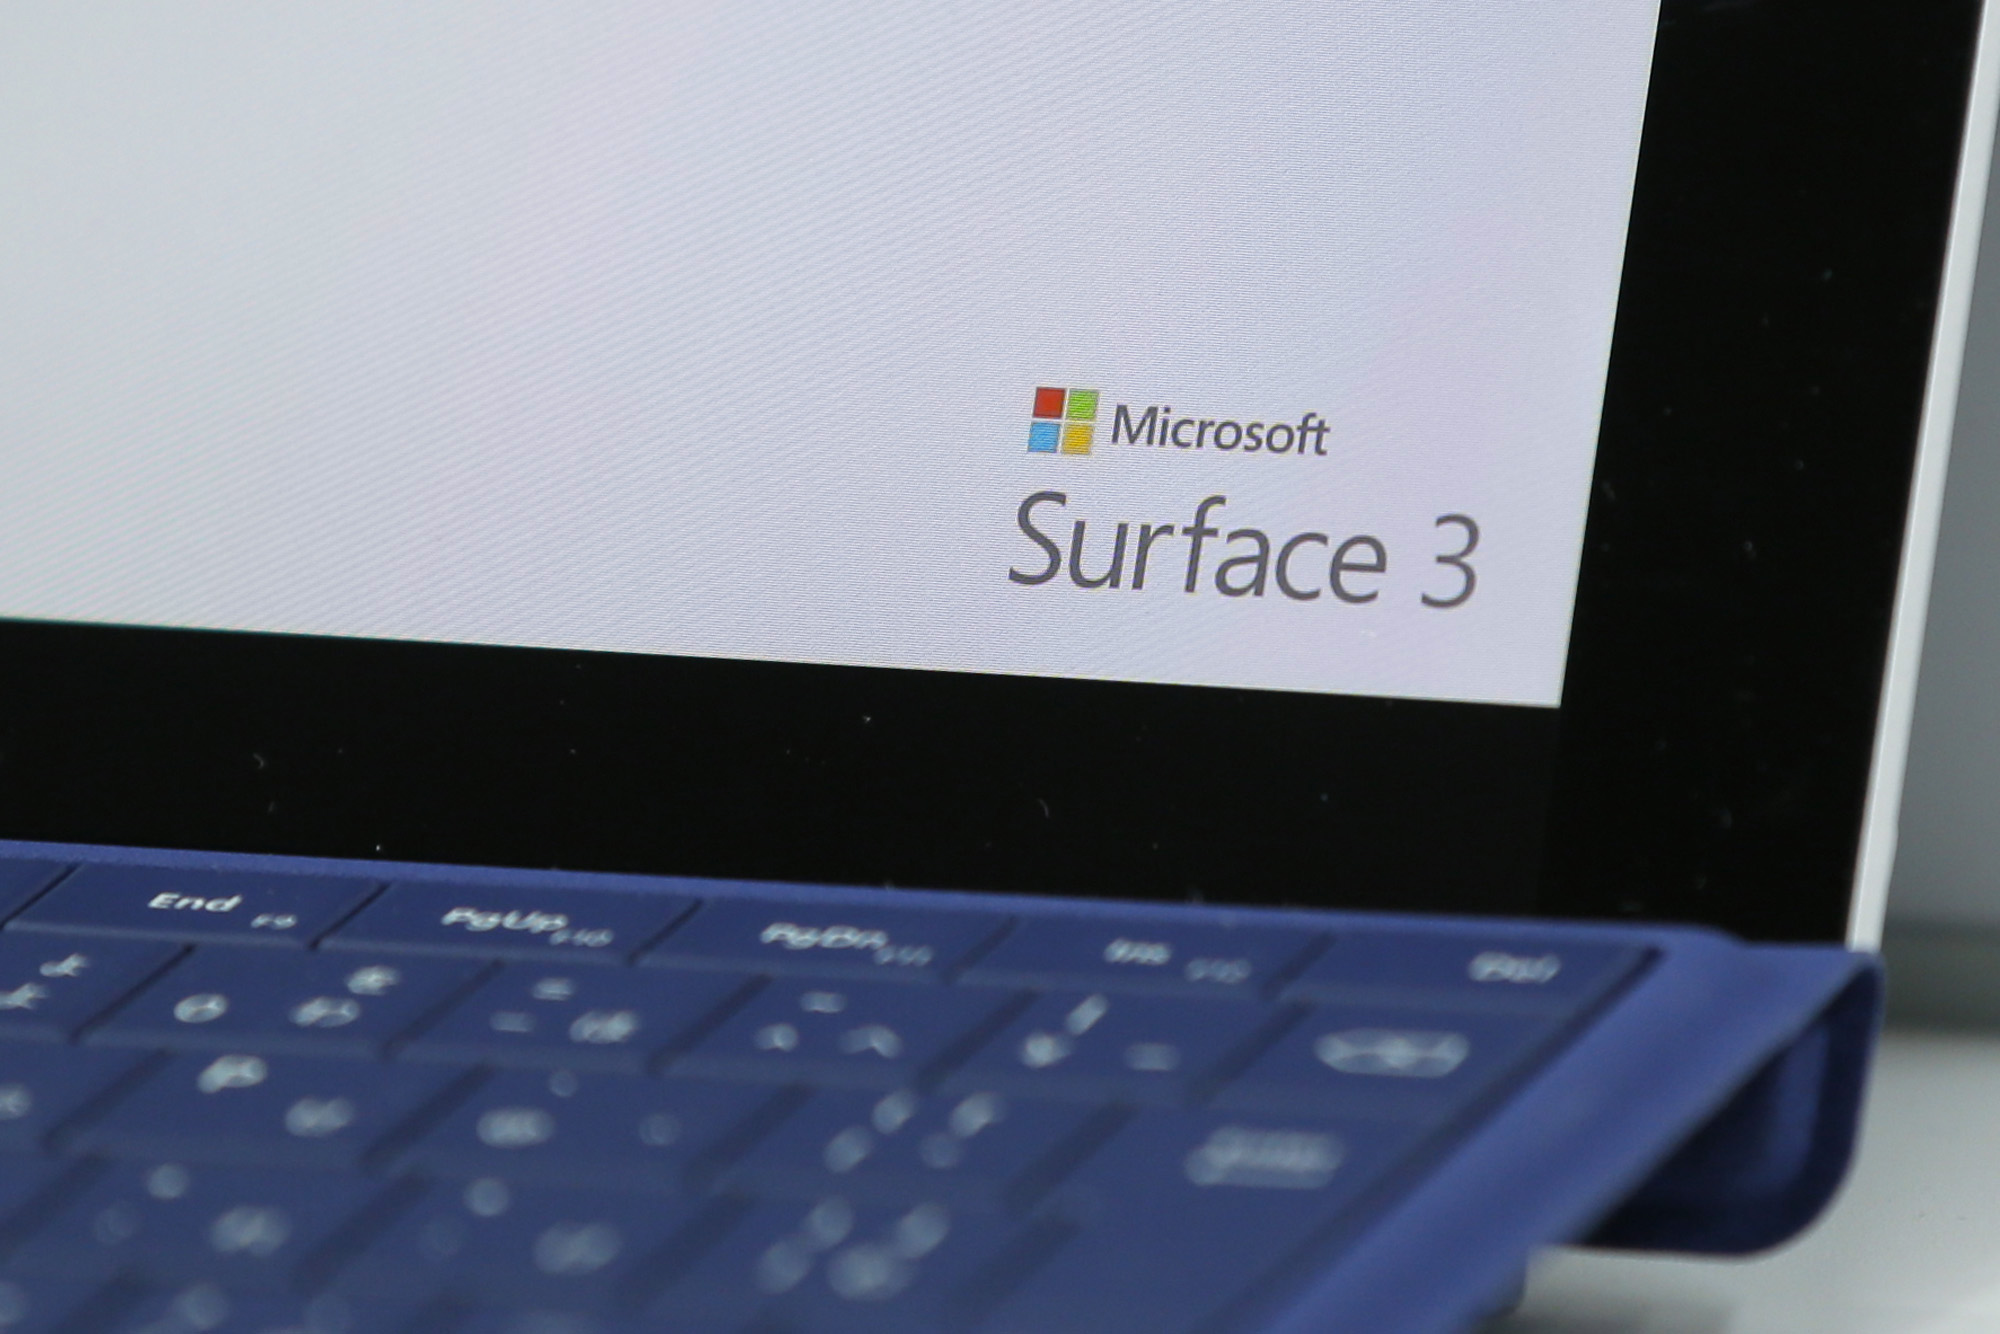 The logo for Microsoft Corp.'s Surface 3 LTE tablet is displayed on the device at a Bic Camera Inc. electronics store in Tokyo, Japan, on Friday, June 19, 2015. (Bloomberg&mdash;Bloomberg via Getty Images)